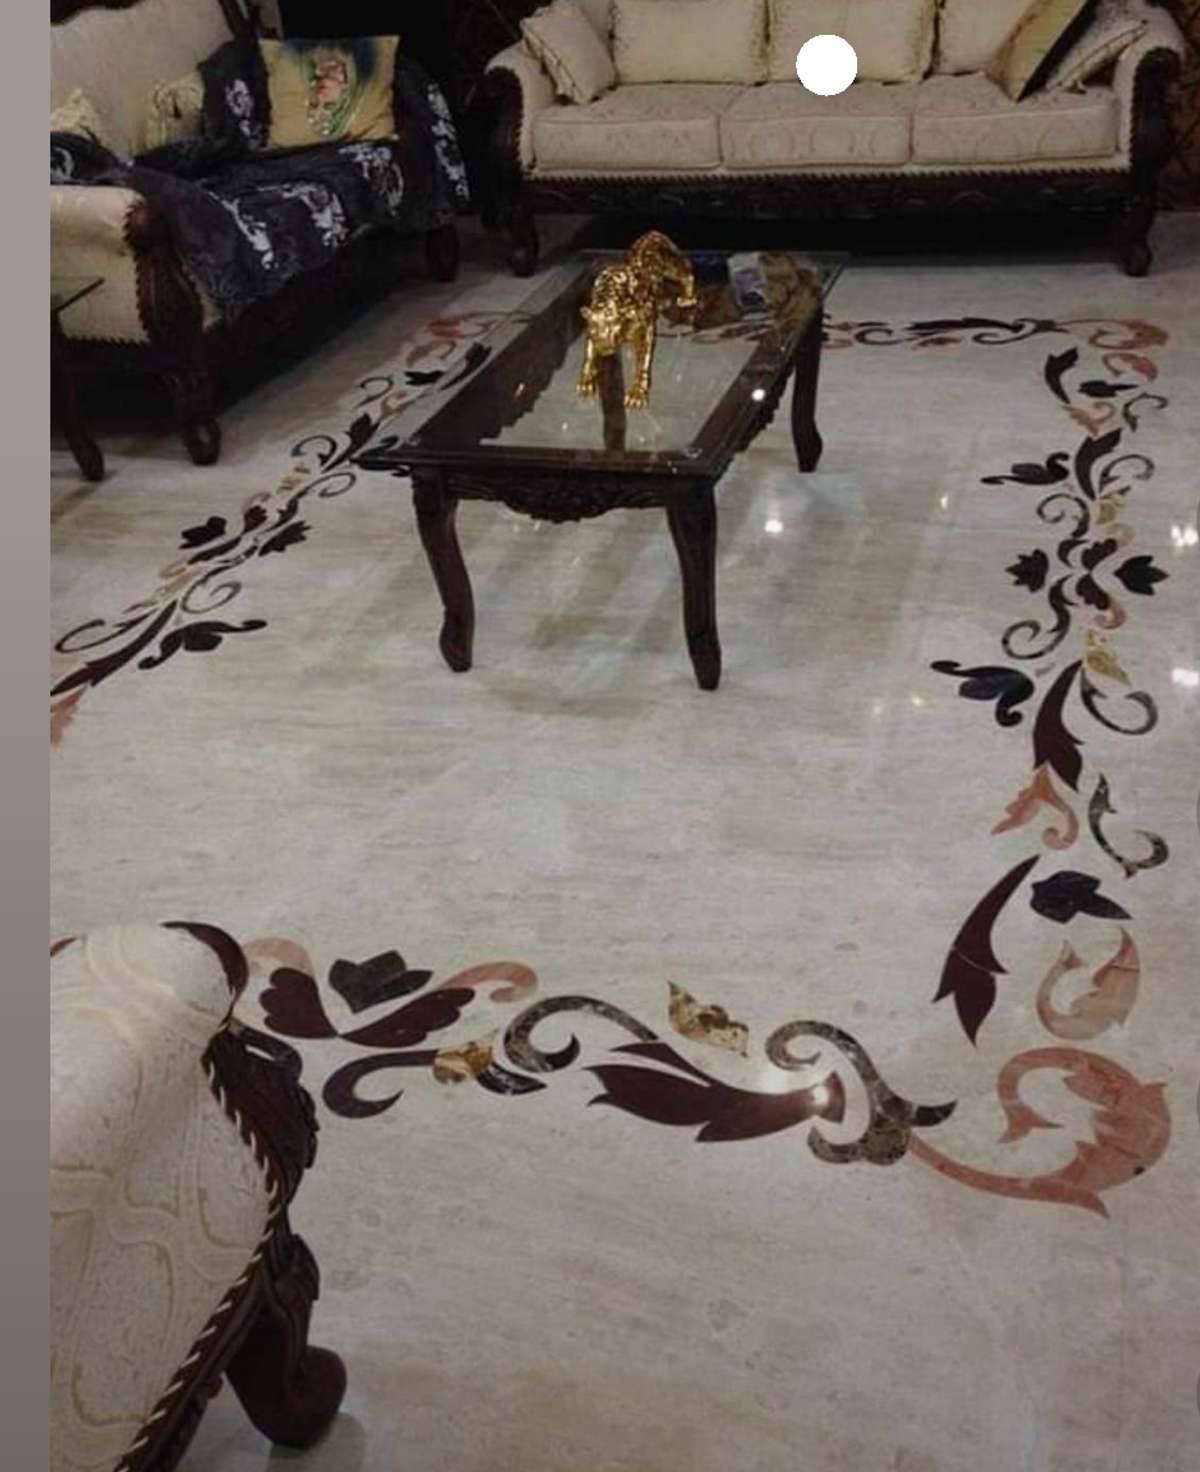 sir marble flooring inlay work ki koi requirement ho to please contact kare.706038.8556